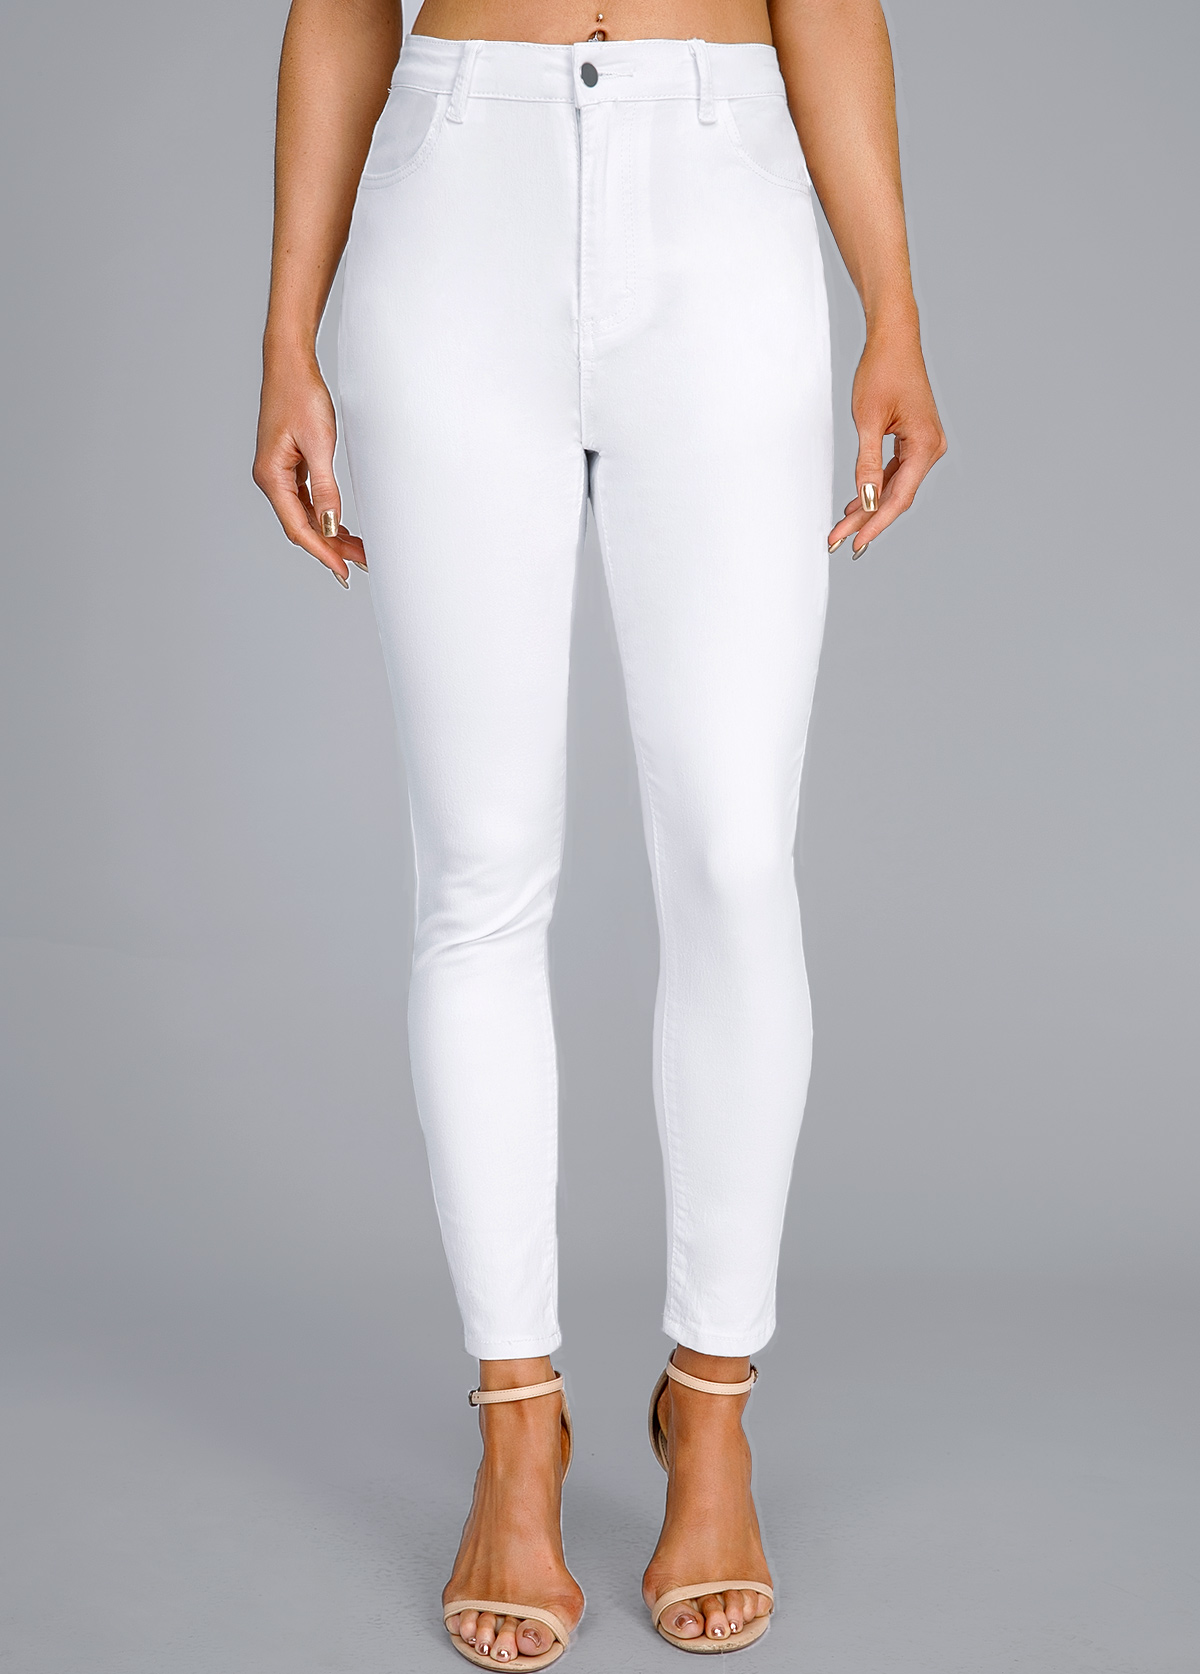 White Button Fly High Waisted Leggings